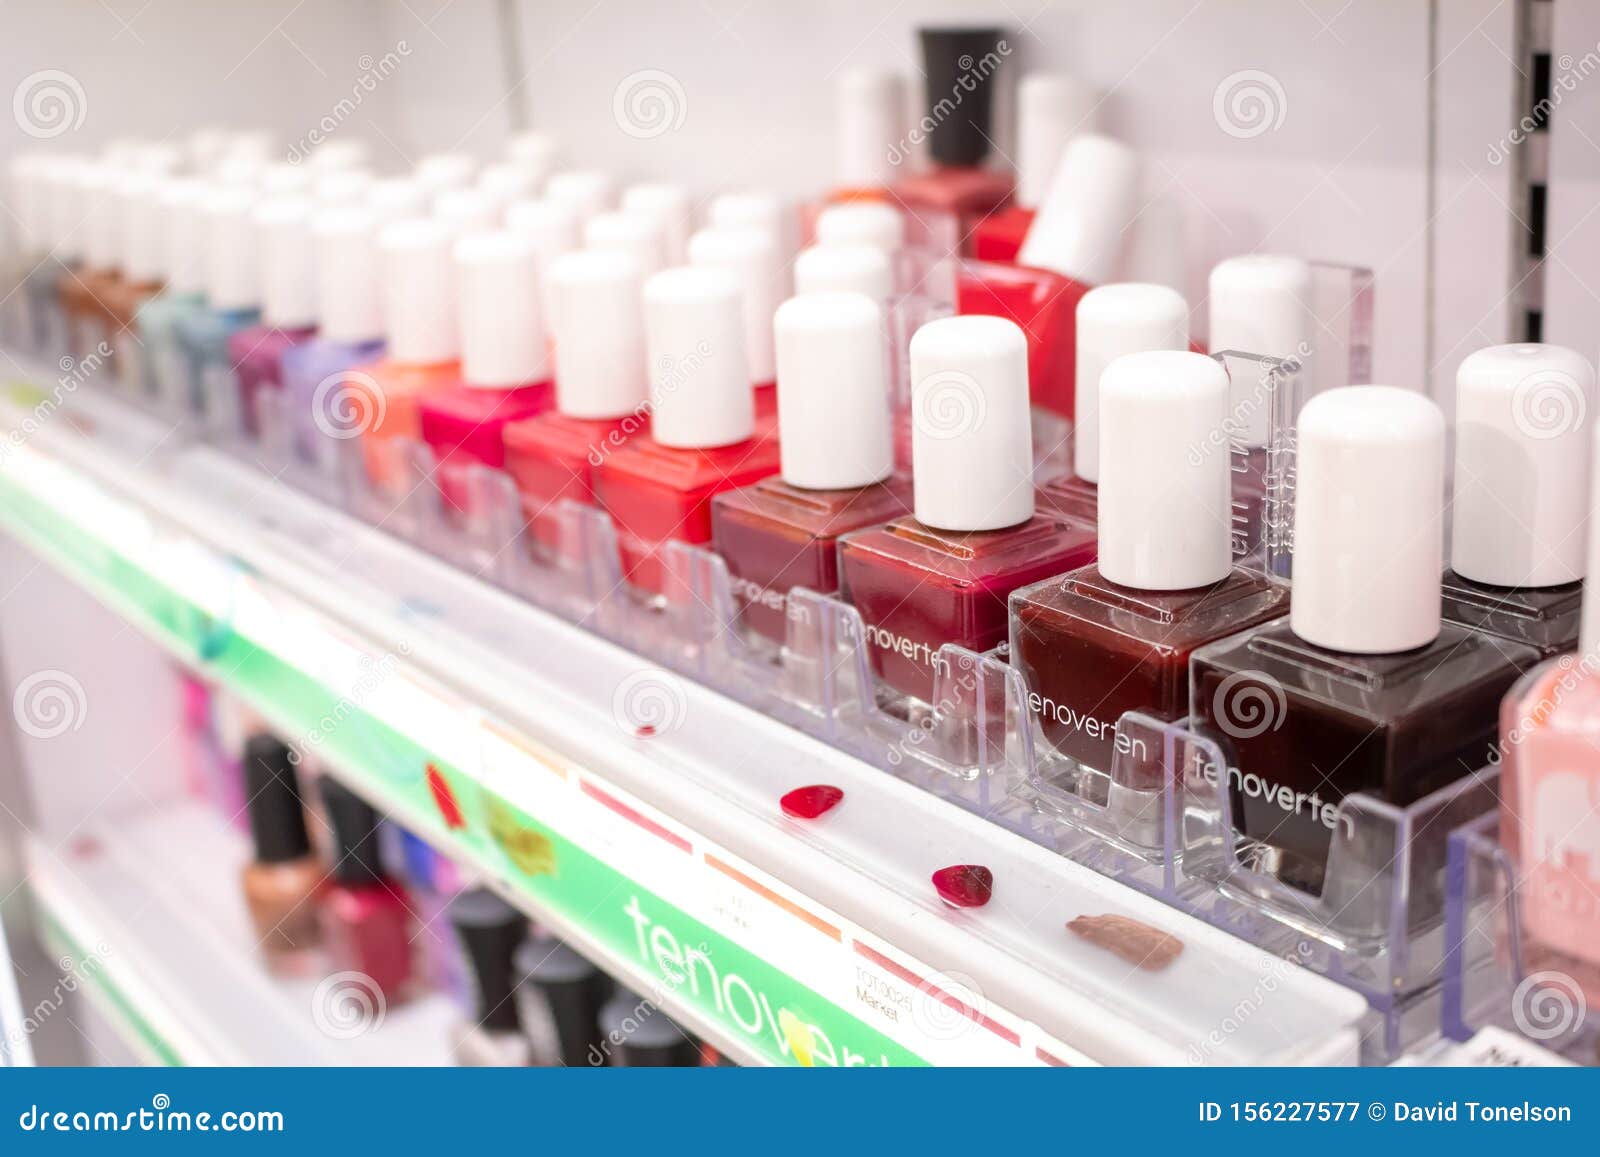 Nail polish samples on desk in beauty store Stock Photo by leszekglasner